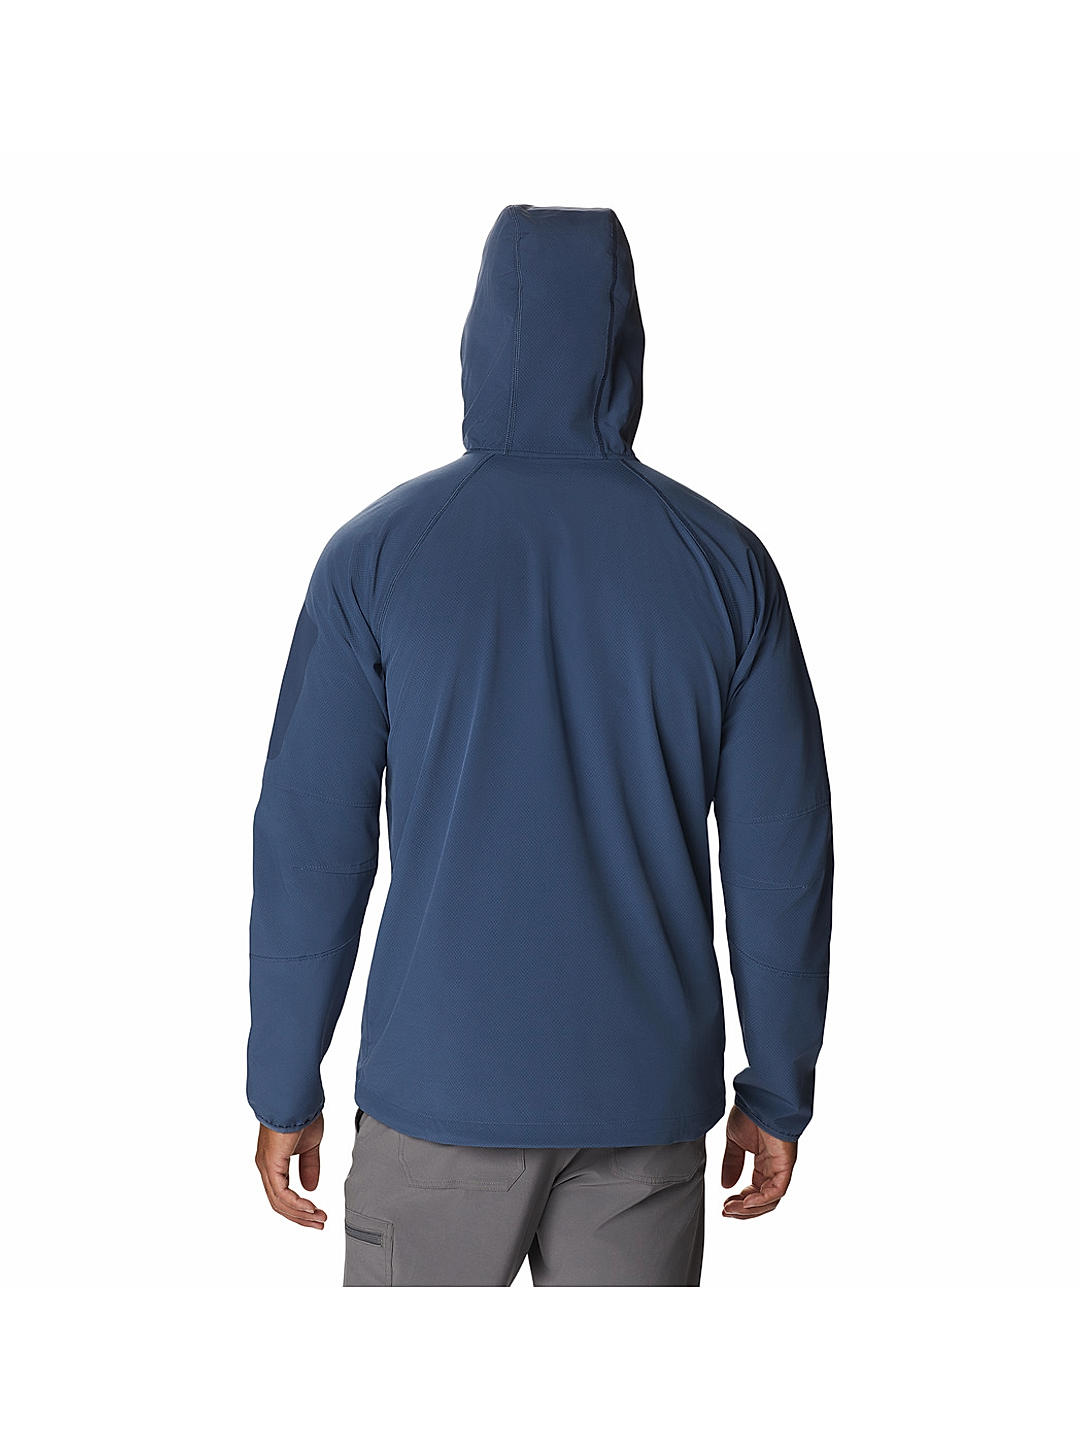 Columbia Men Navy / Blue Tall Heights Hooded Softshell